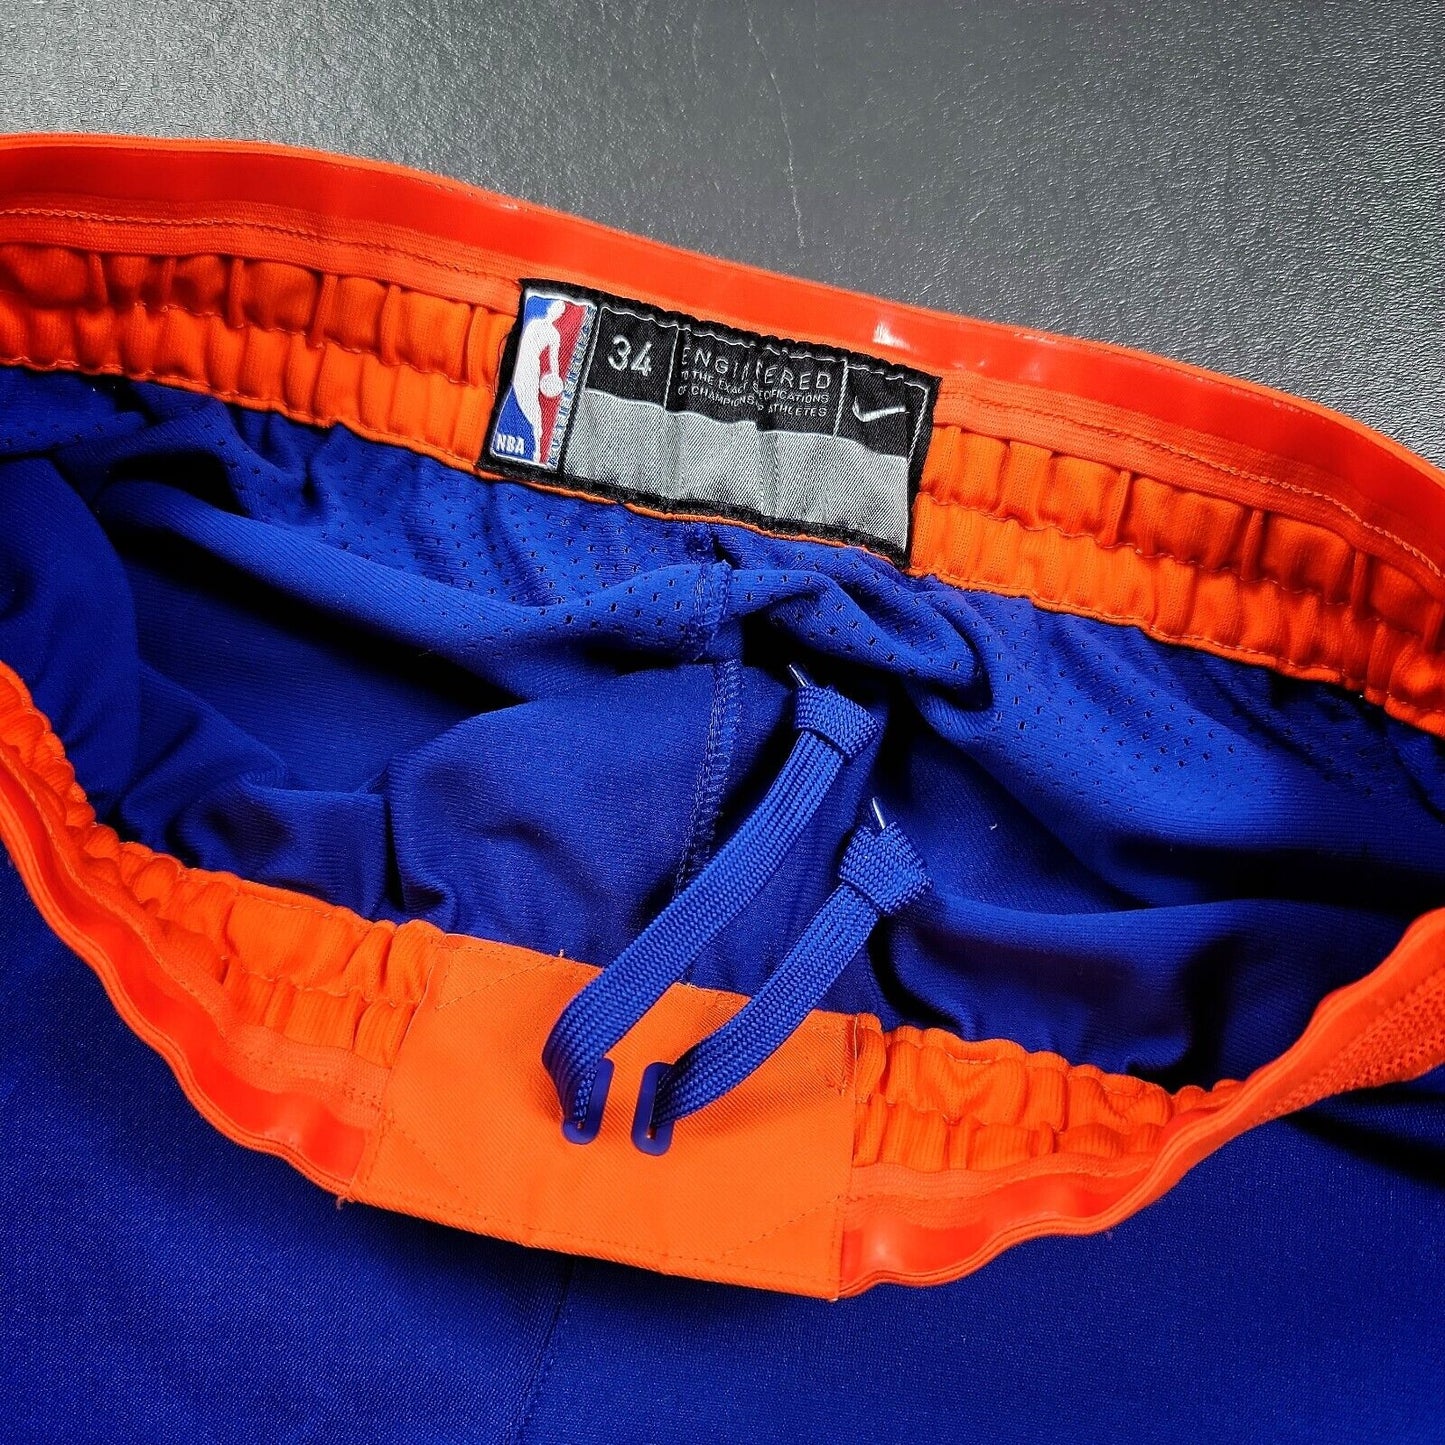 100% Authentic New York Knicks Pro Cut Game Shorts Size 34 M Mens